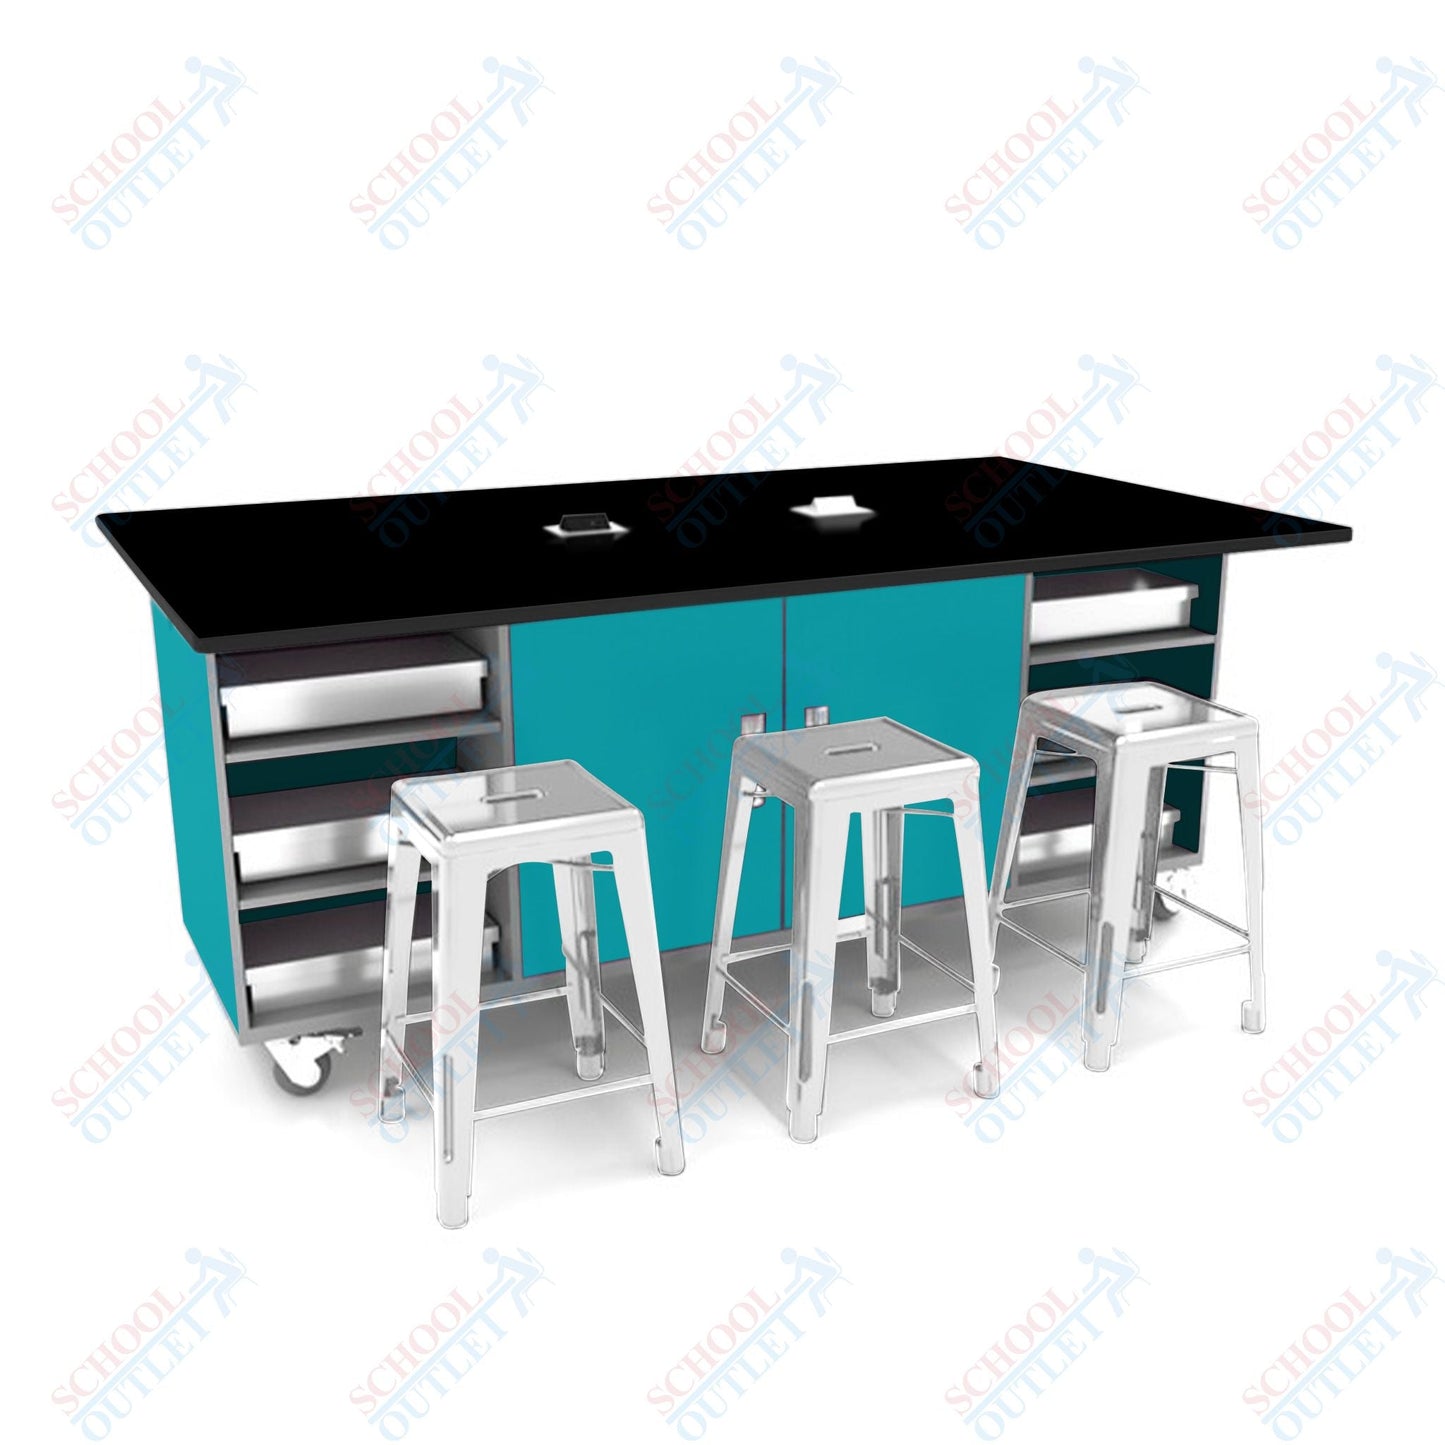 CEF ED Double Table 42"H Tough Top, Laminate Base with 6 Stools, Storage bins, and Electrical Outlets Included. - SchoolOutlet